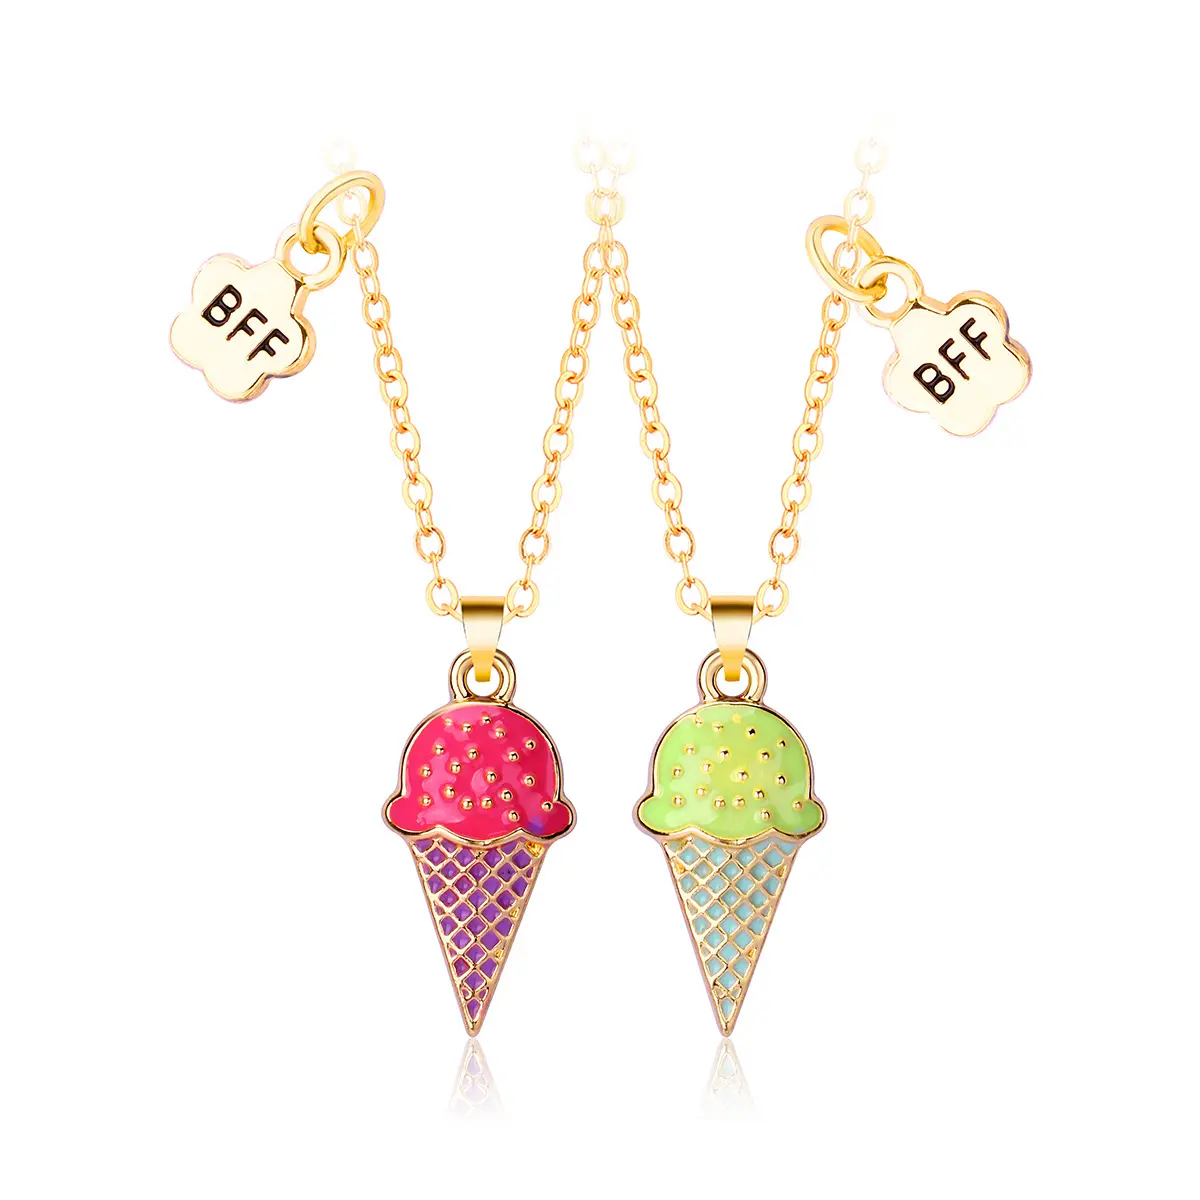 Trending Jewelry Ice Cream Necklace Charms Alloy Fashion Necklace For Kids Great Jewelry Gift For Close Friends